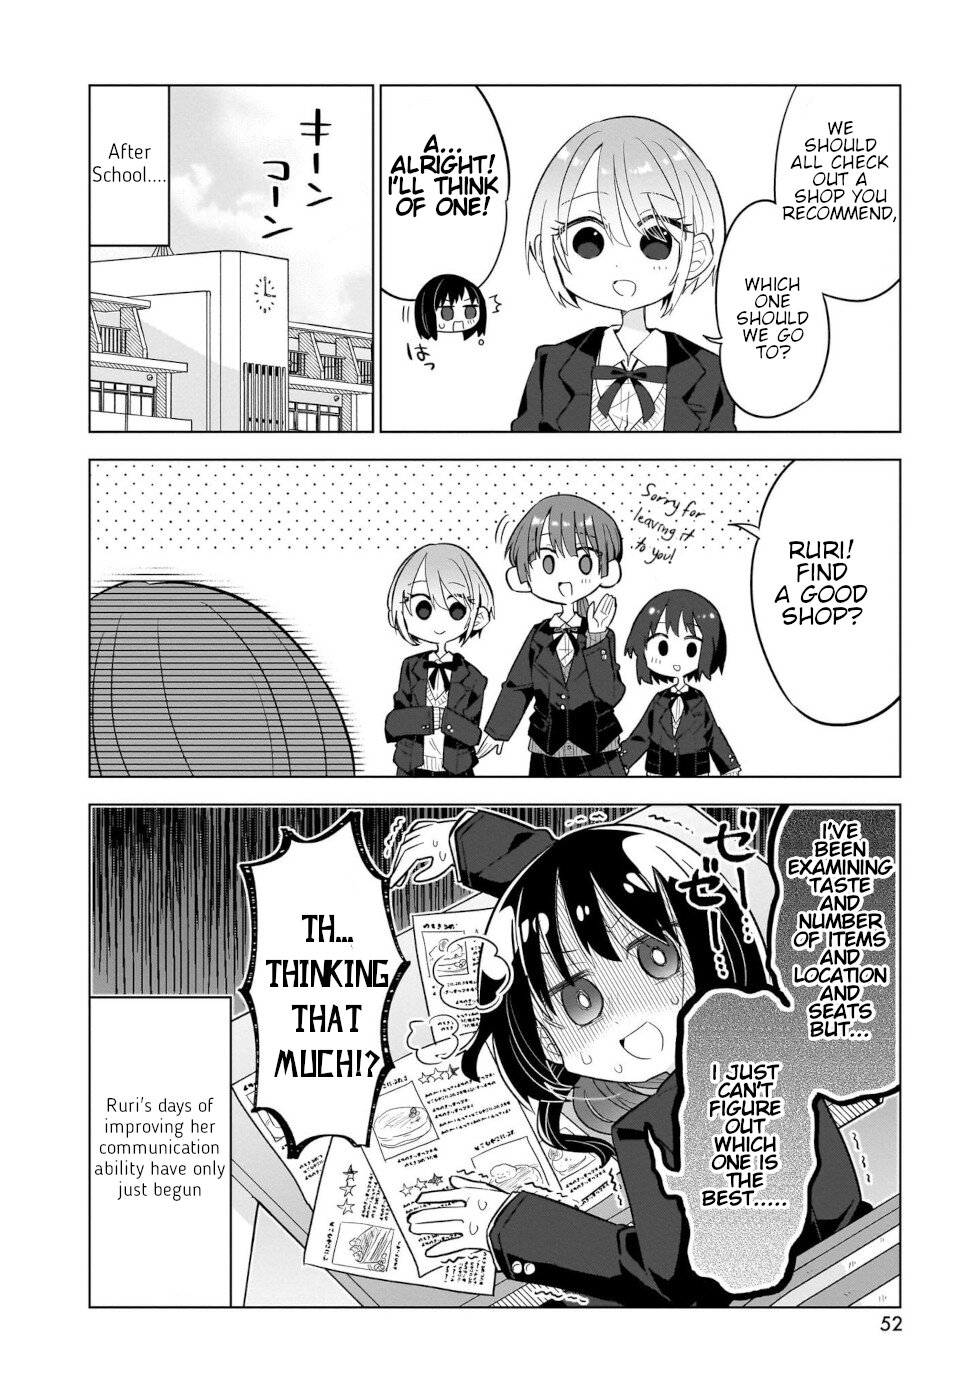 Sweets, Elf, And A High School Girl - Page 2